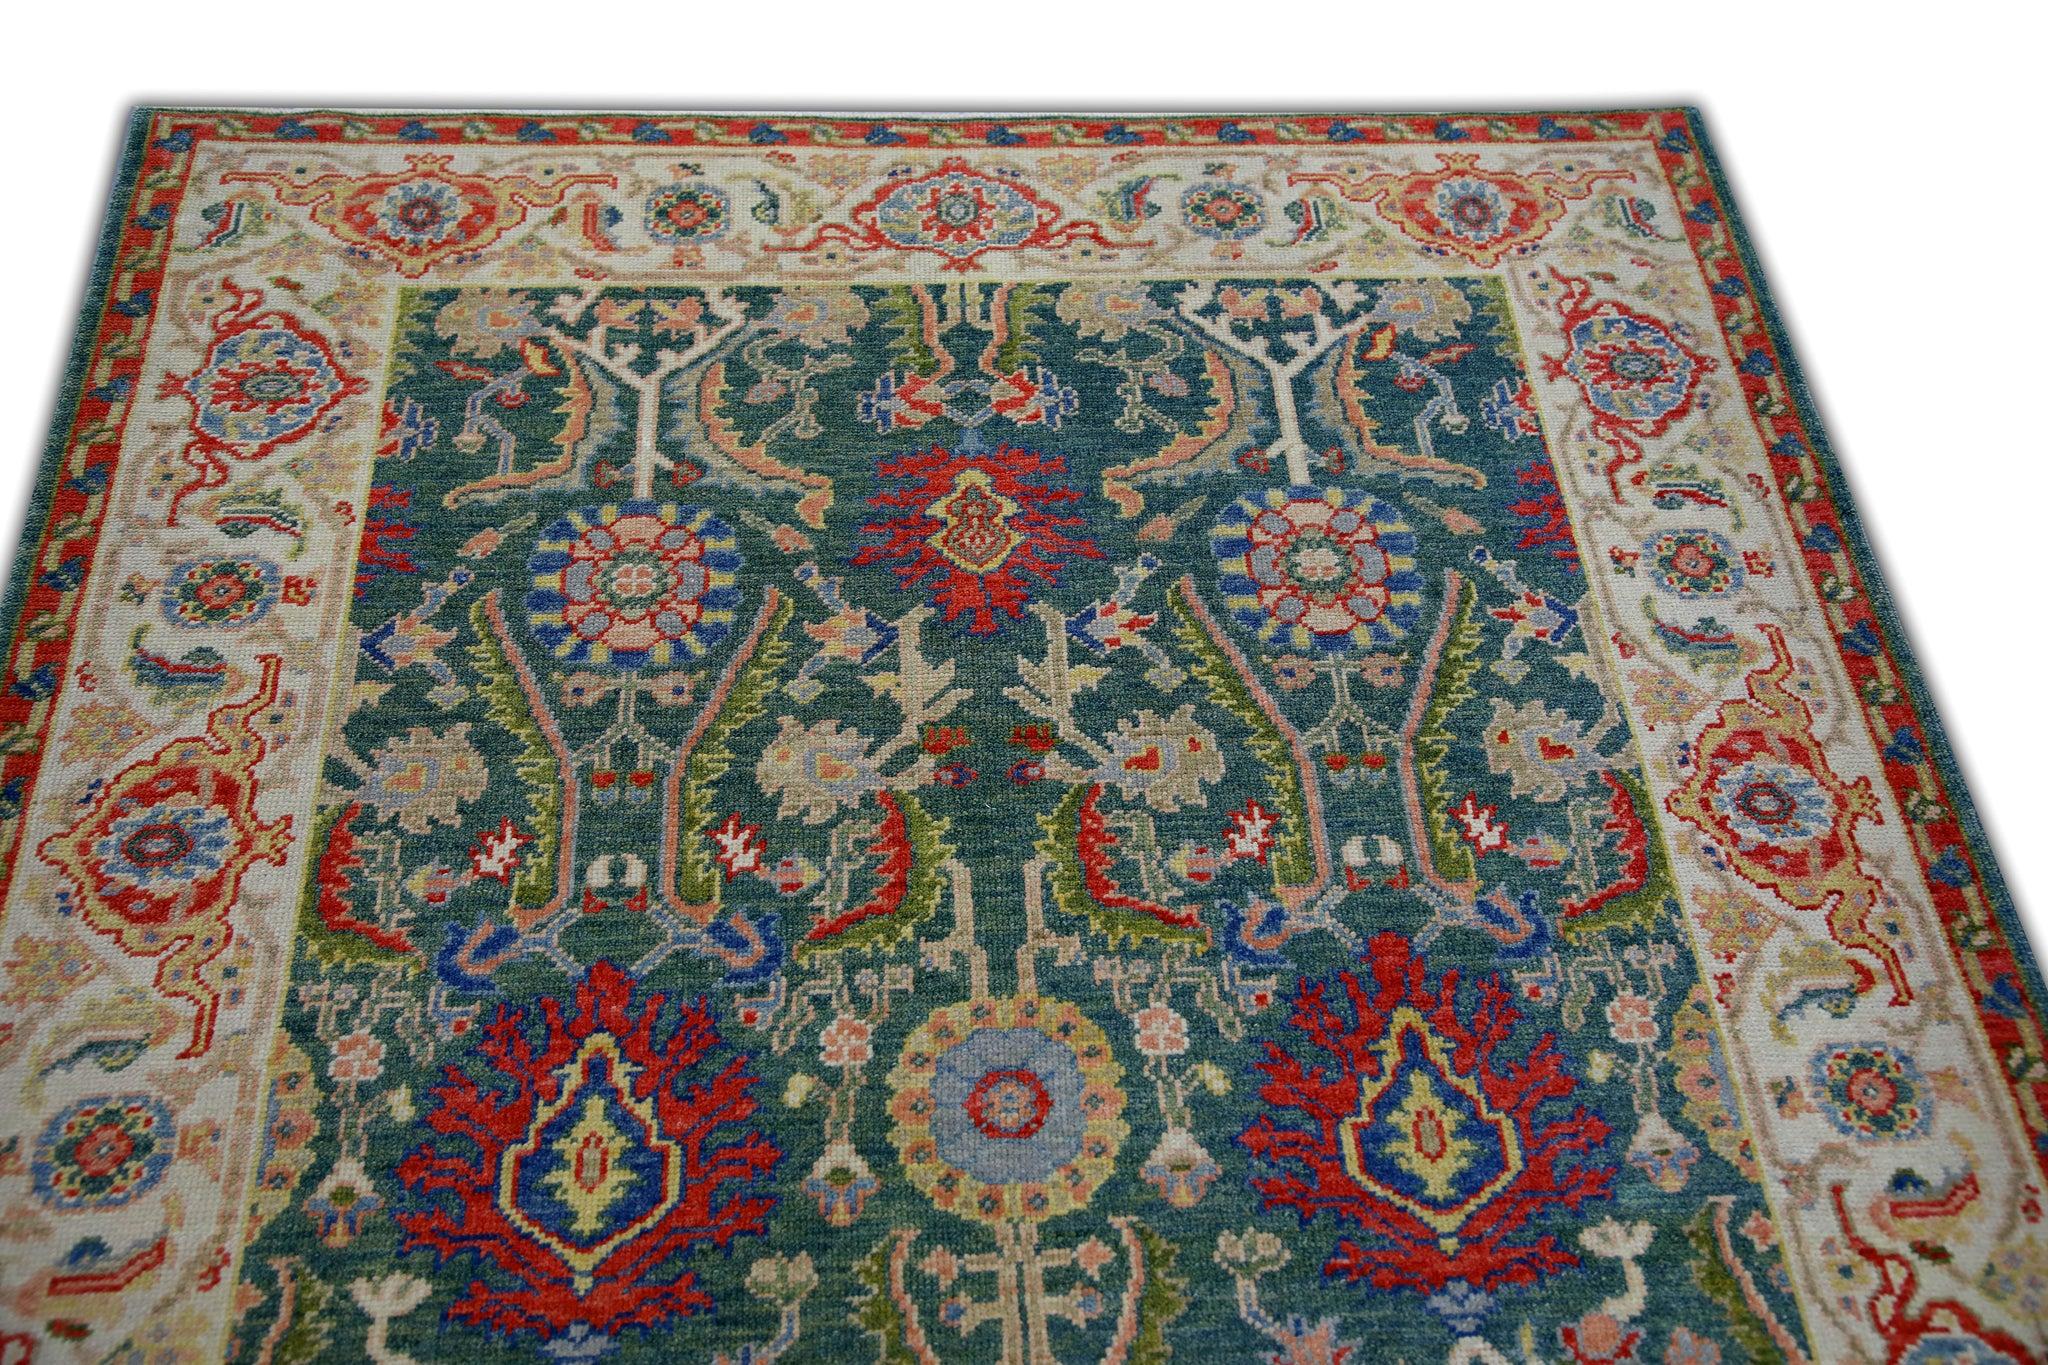 Green & Red Floral Design Handwoven Wool Turkish Finewoven Oushak Rug 4'3 x 6'3 In New Condition For Sale In Houston, TX